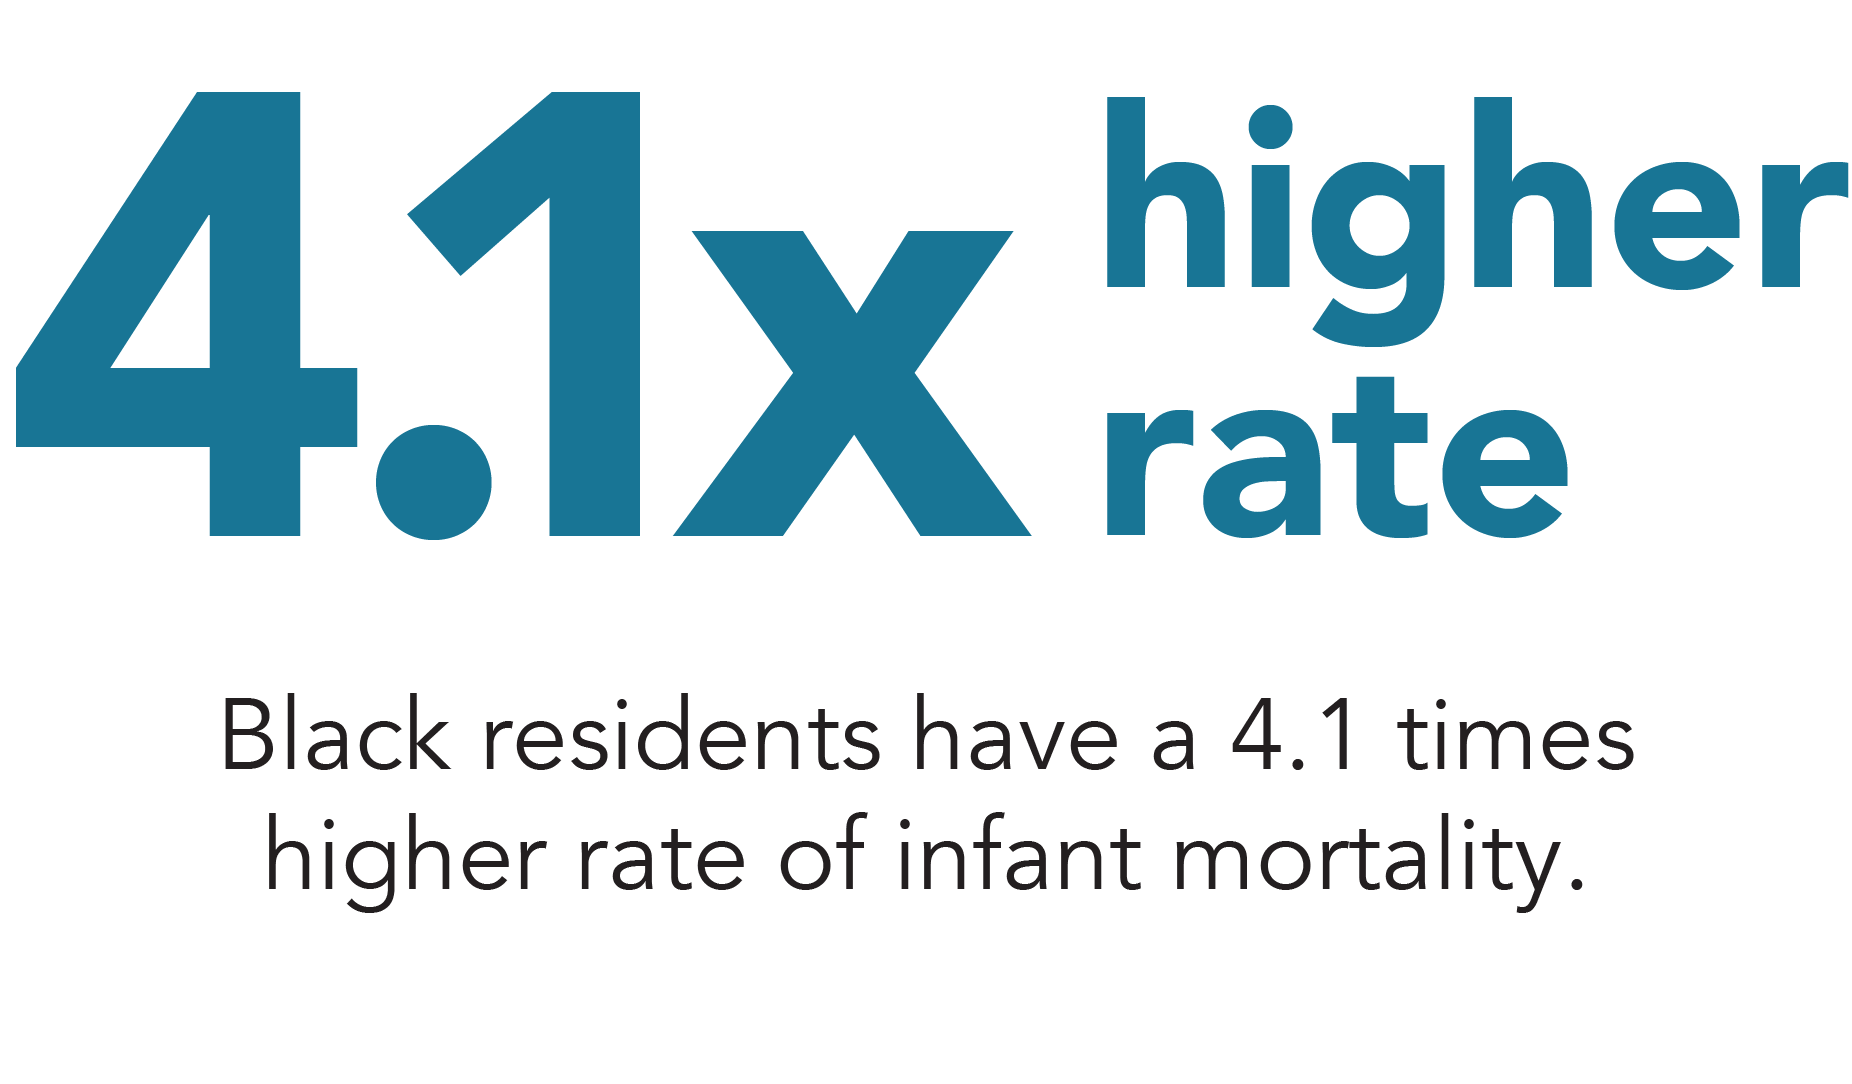 Black residents have a 4.1 time higher rate of infant mortality?